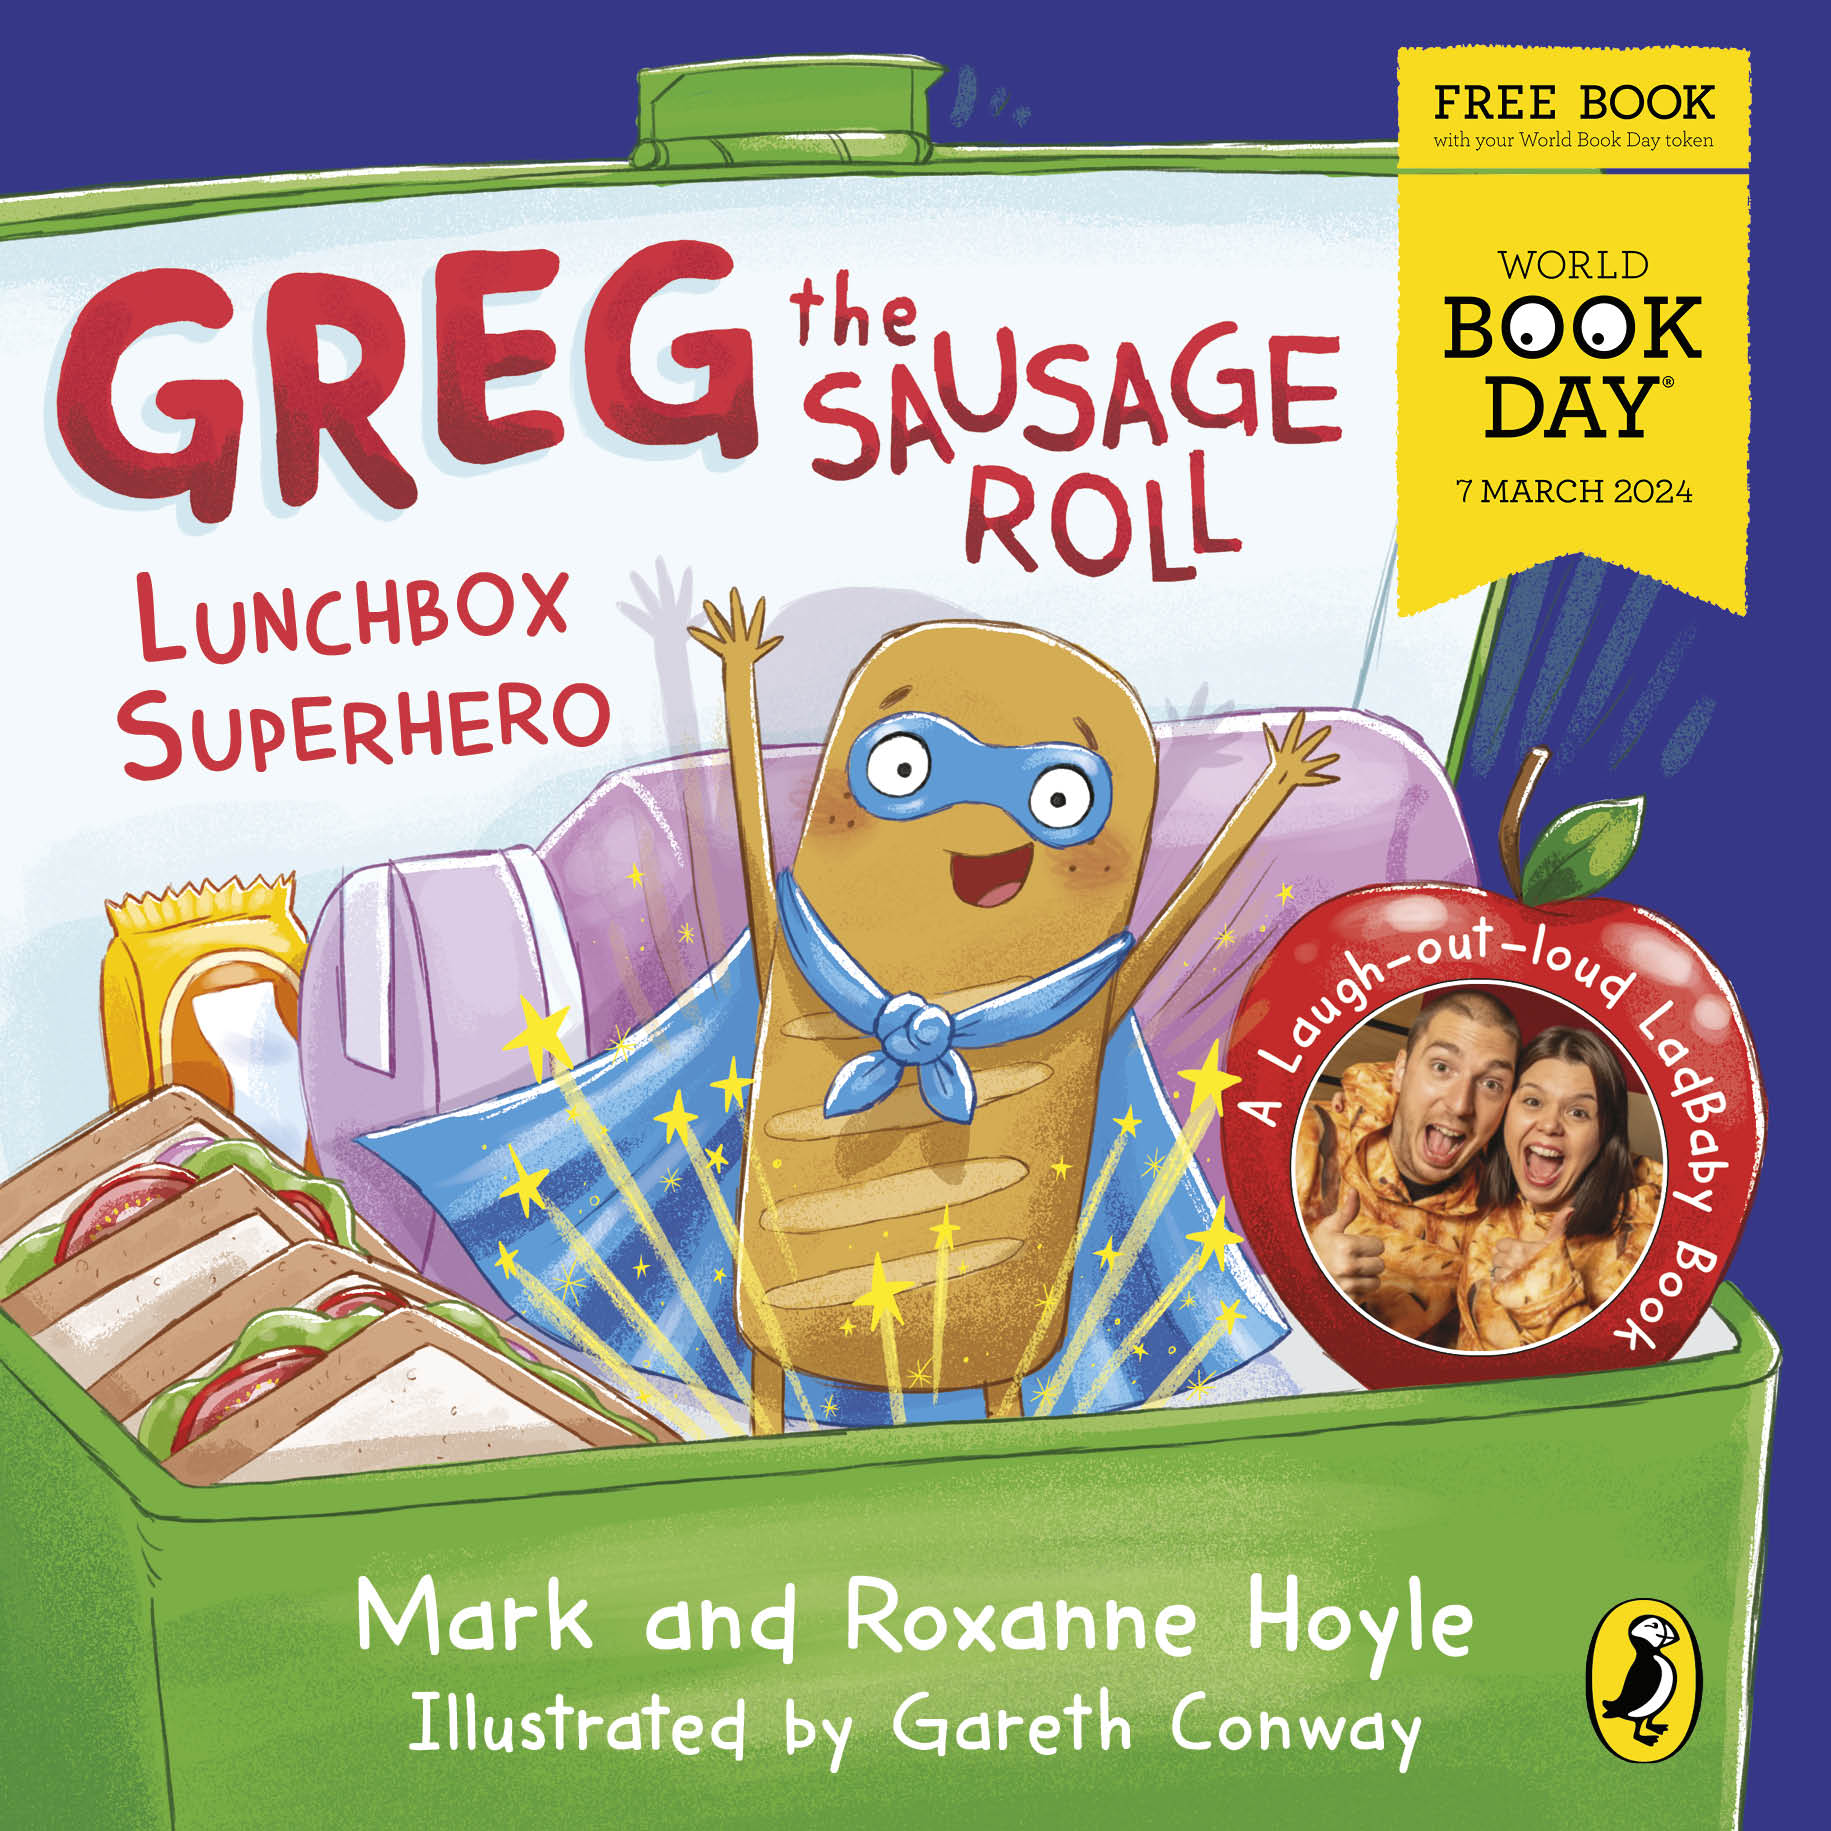 Greg the Sausage Roll: Lunchbox Superhero : A World Book Day 2024